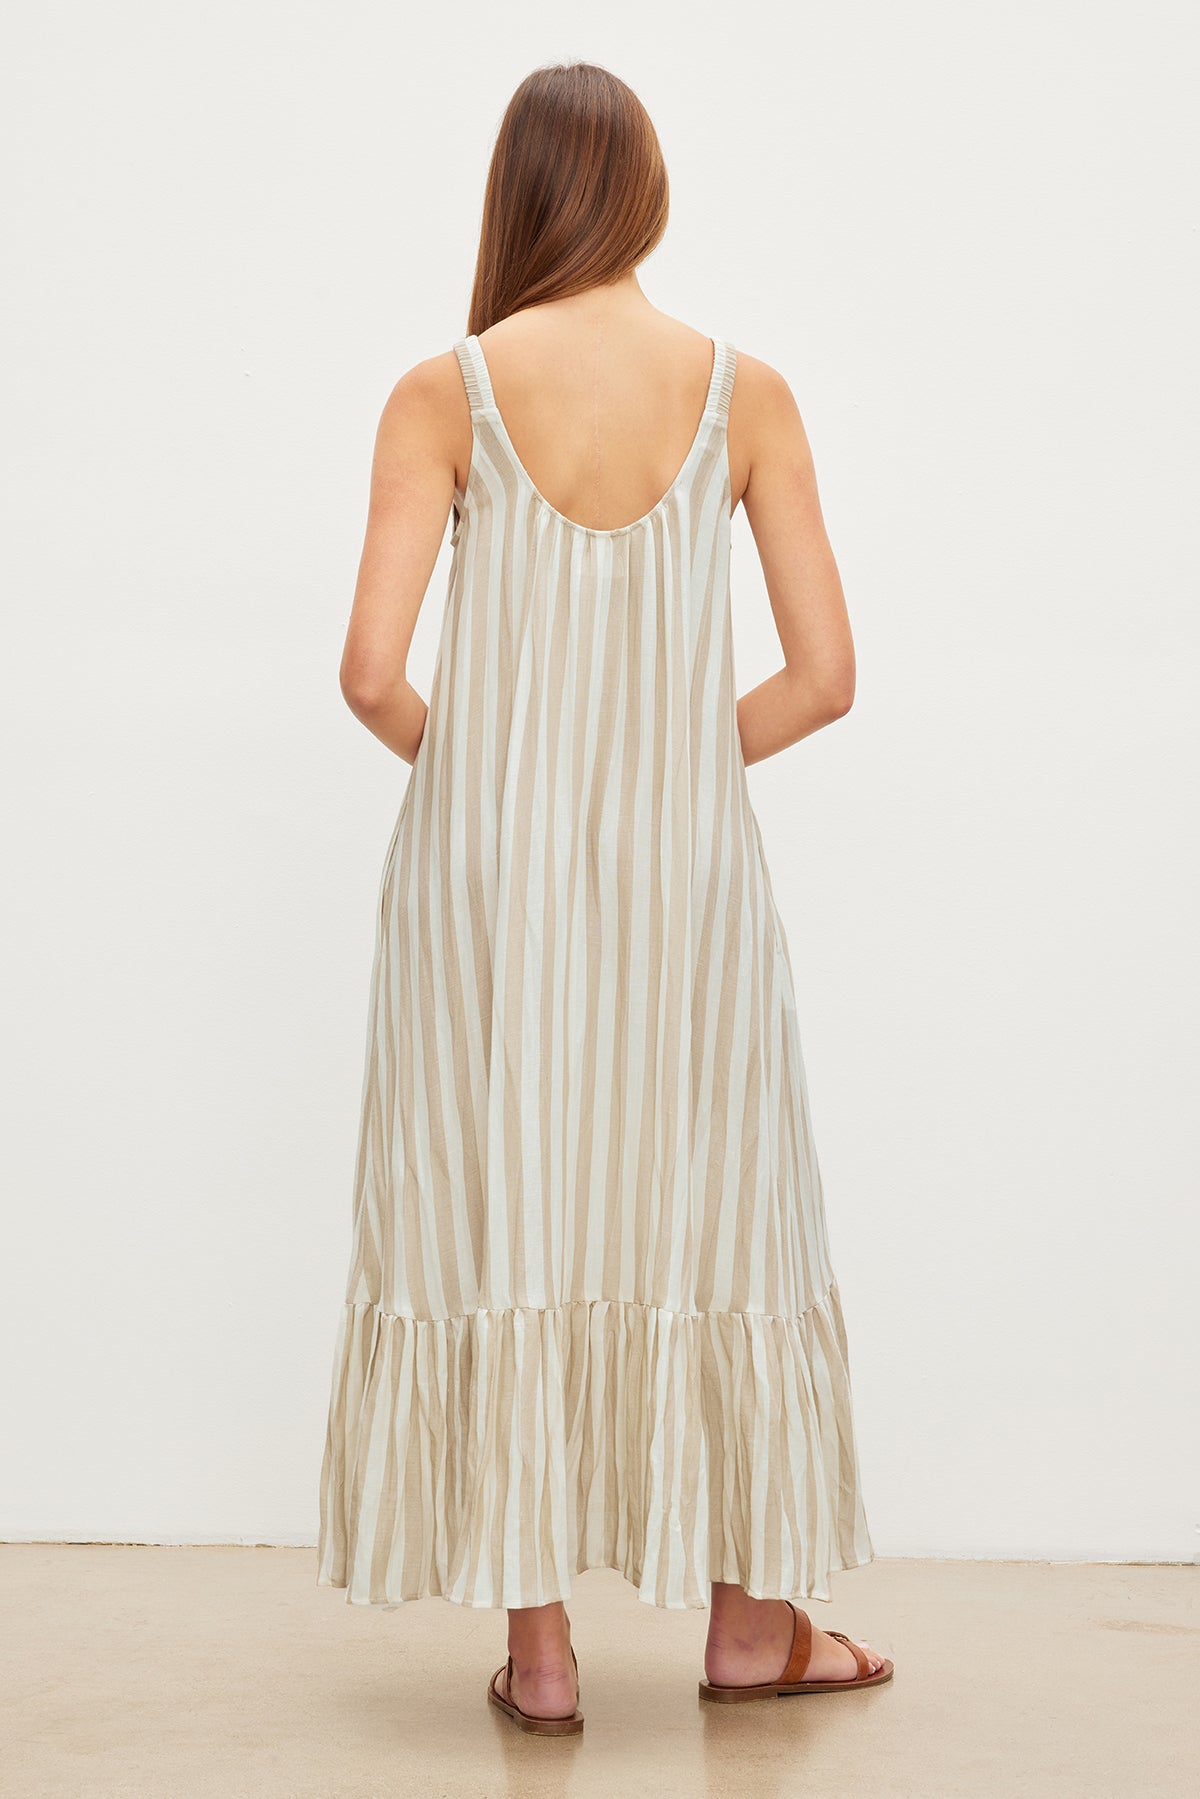 A woman stands facing away from the camera, wearing a Velvet by Graham & Spencer MERADITH STRIPED LINEN MAXI DRESS with thin straps and ruffled hem, paired with brown sandals.-35982309654721